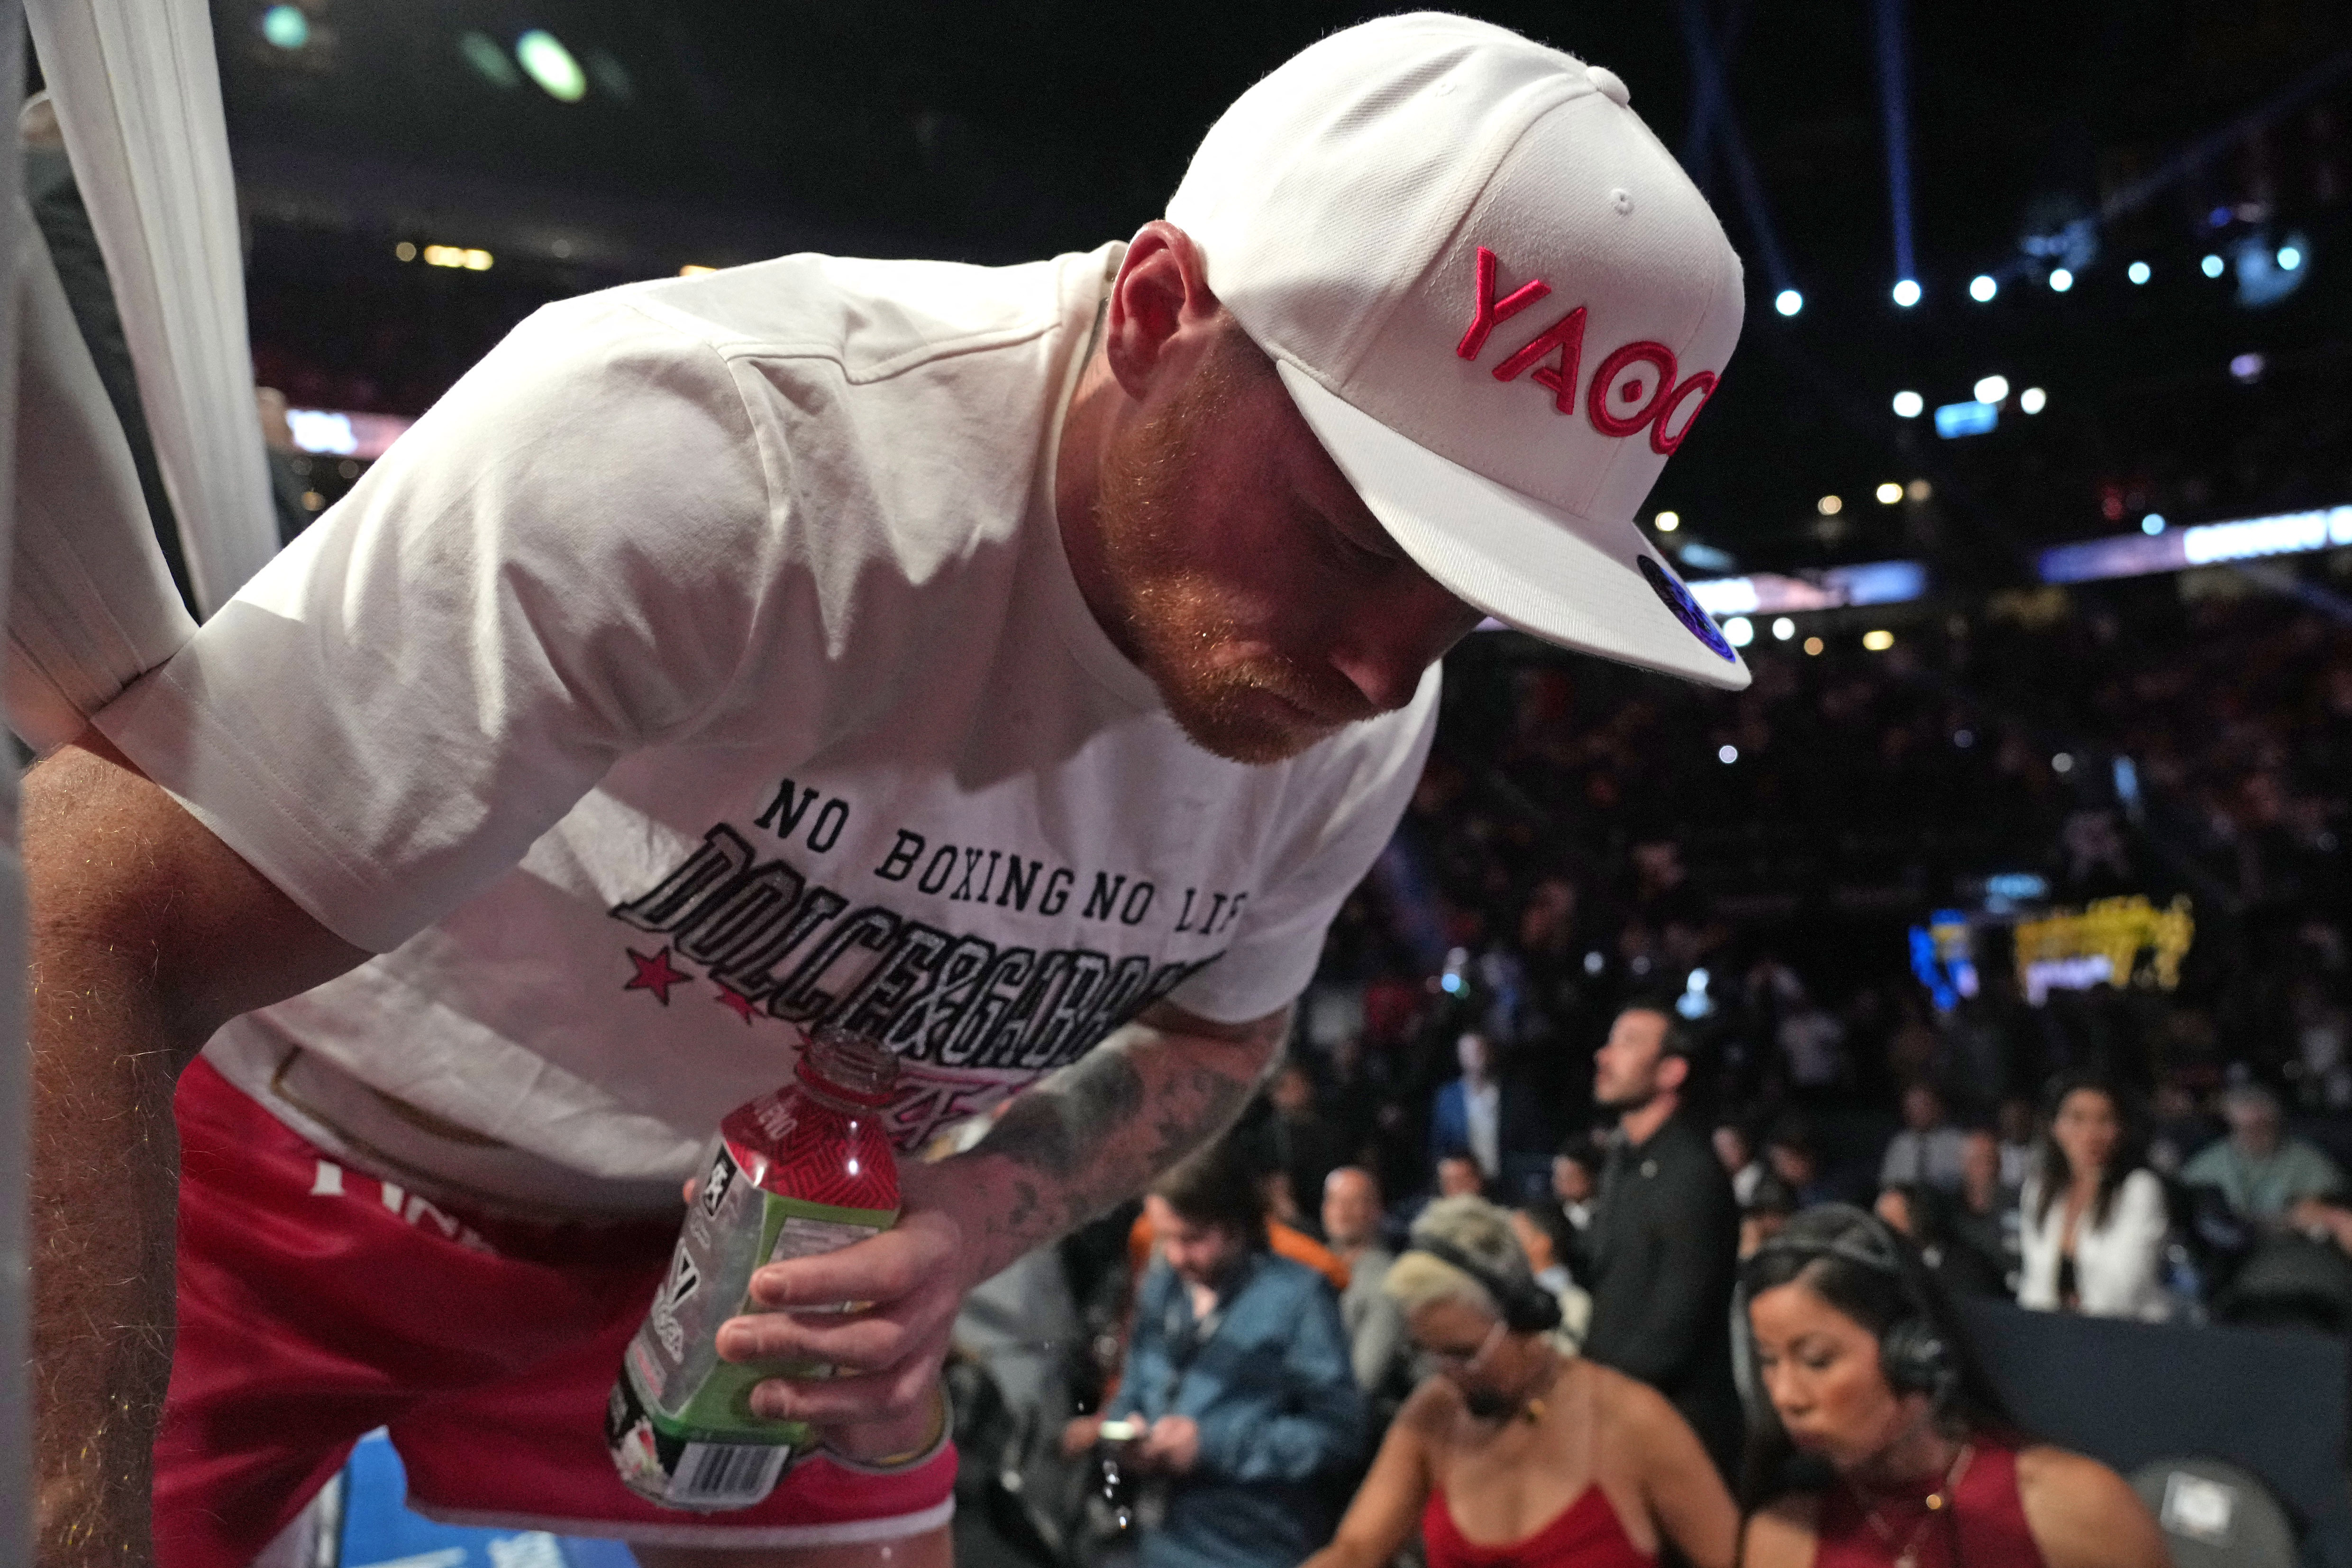 May 7, 2022; Las Vegas, Nevada, USA; Canelo Alvarez exits the ring after being defeated by Dimitry Bivol (not pictured) in their light heavyweight championship bout at T-Mobile Arena. Mandatory Credit: Joe Camporeale-USA TODAY Sports